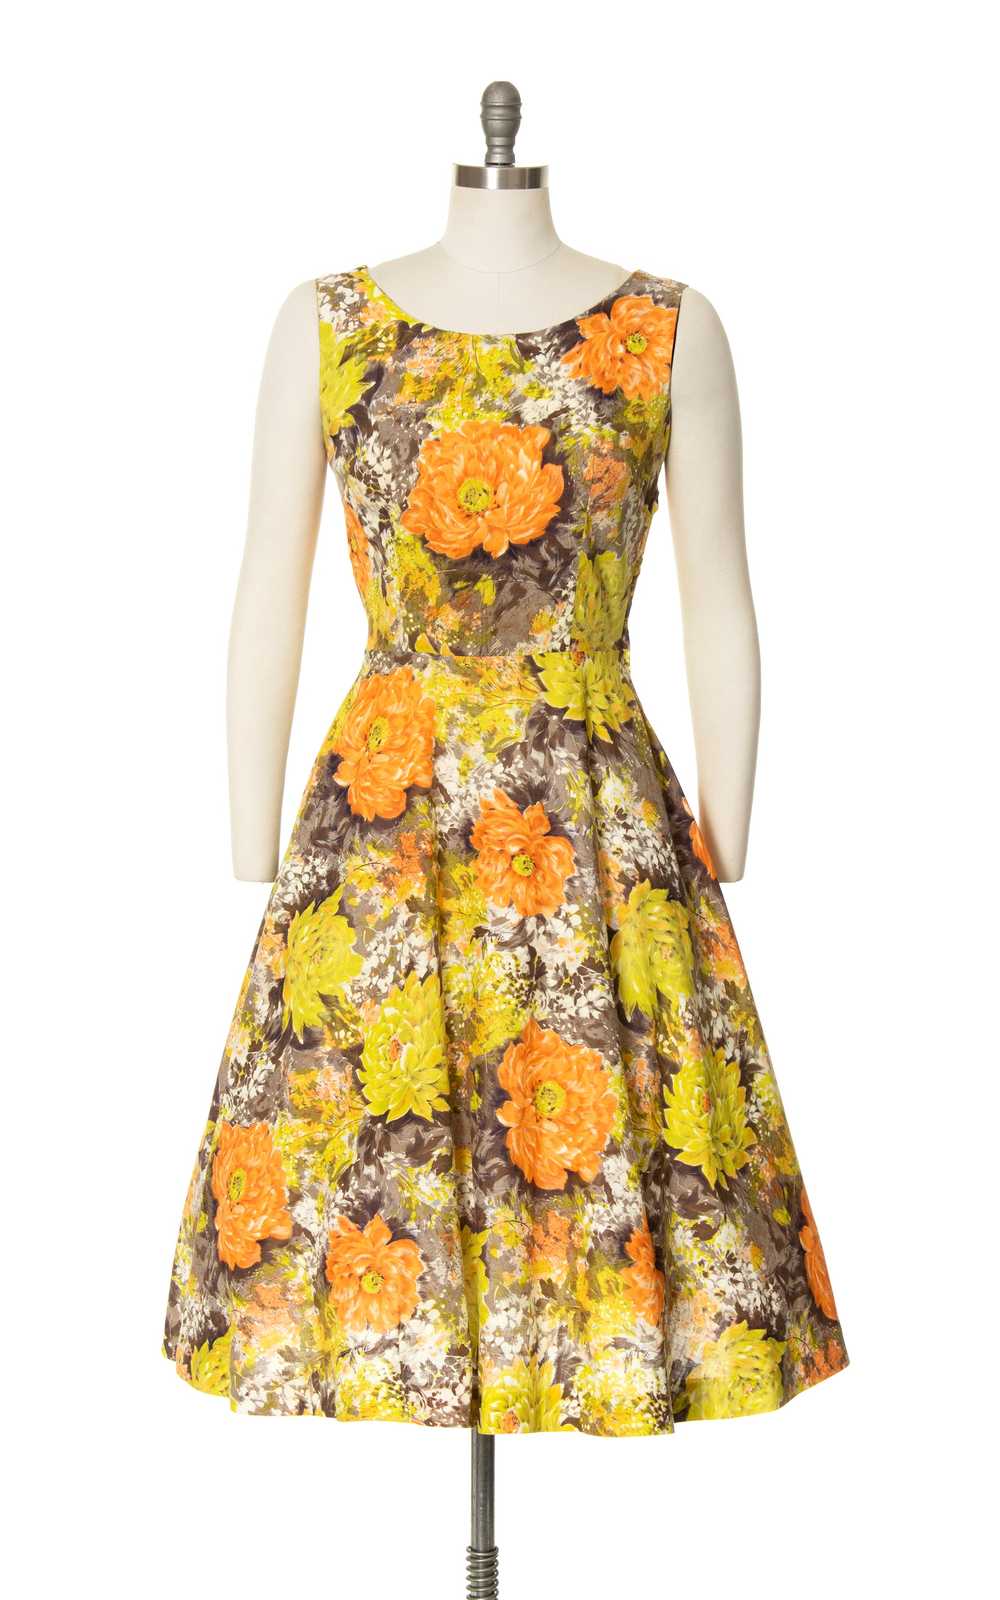 1960s Floral Print Cotton Sundress | small - image 1